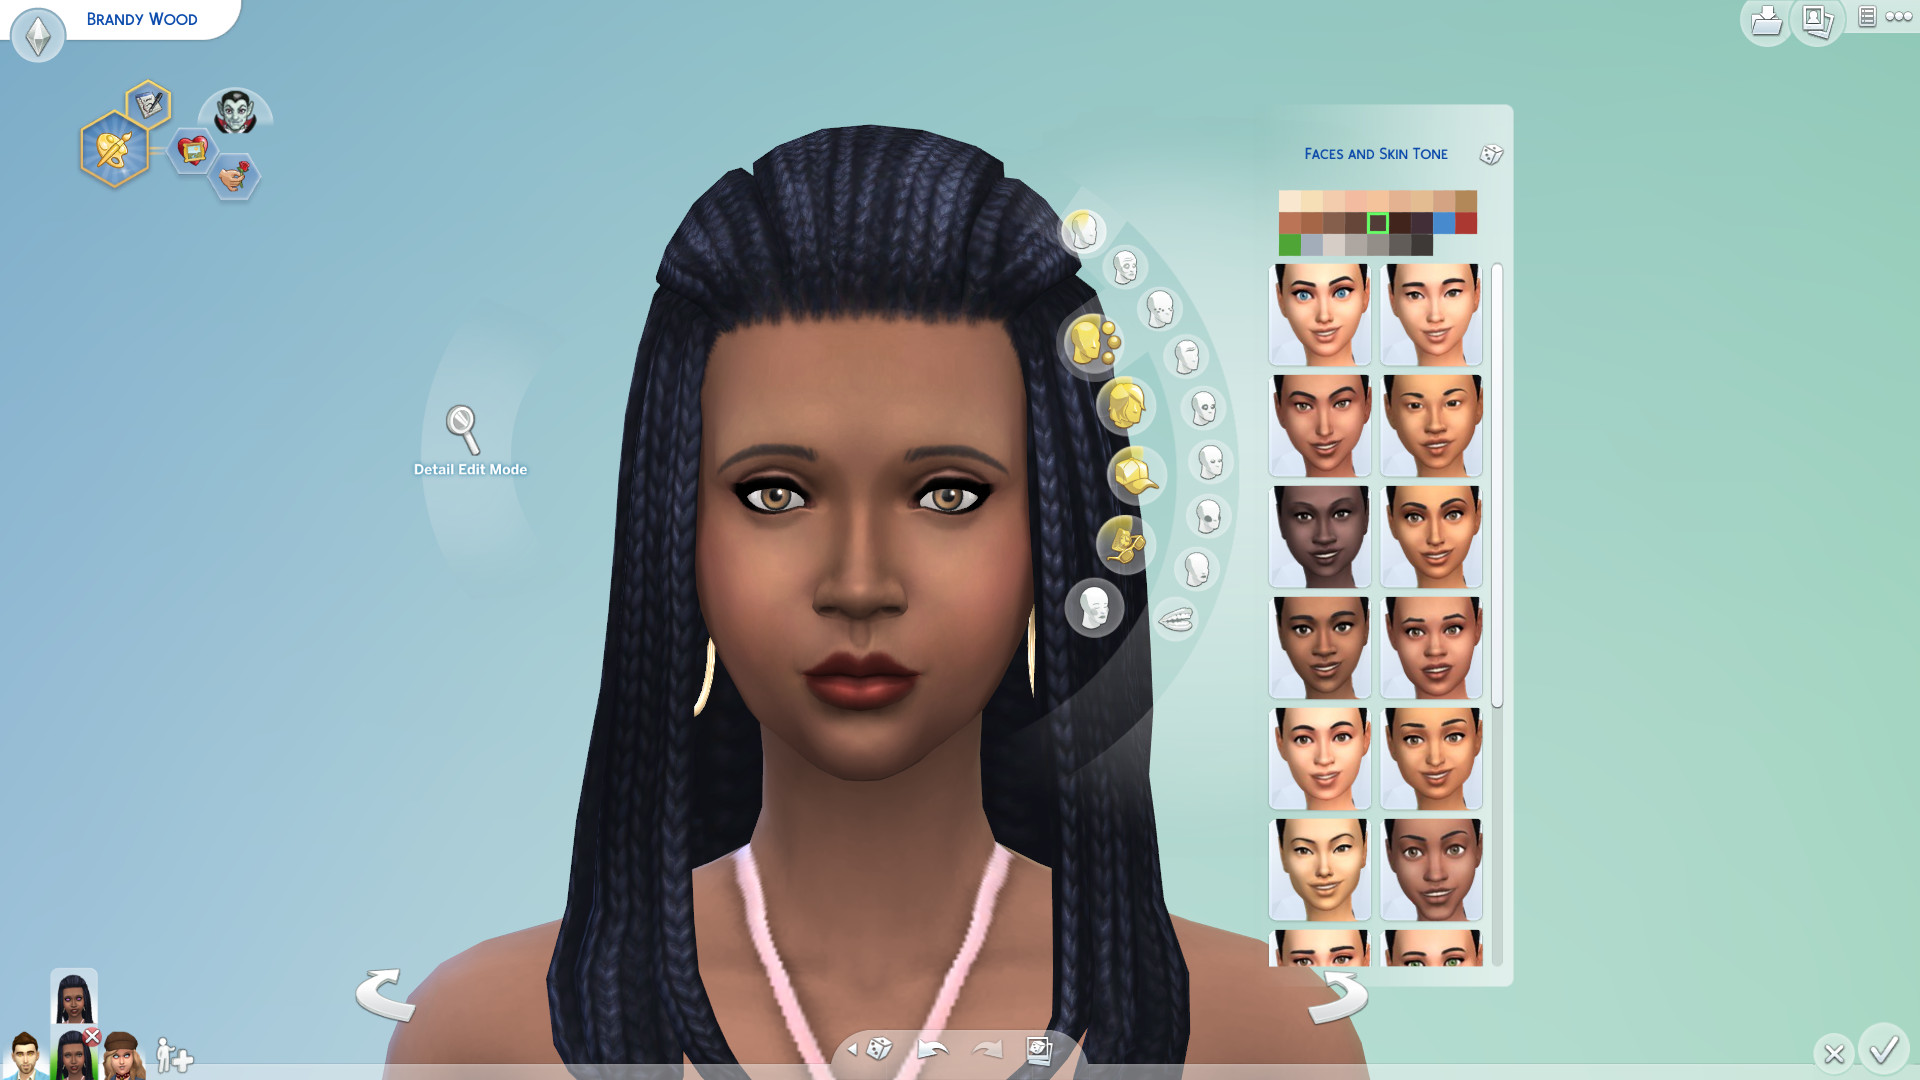 New Sims 4 Skin Tones And Fixes To Existing Tones Coming This Fall